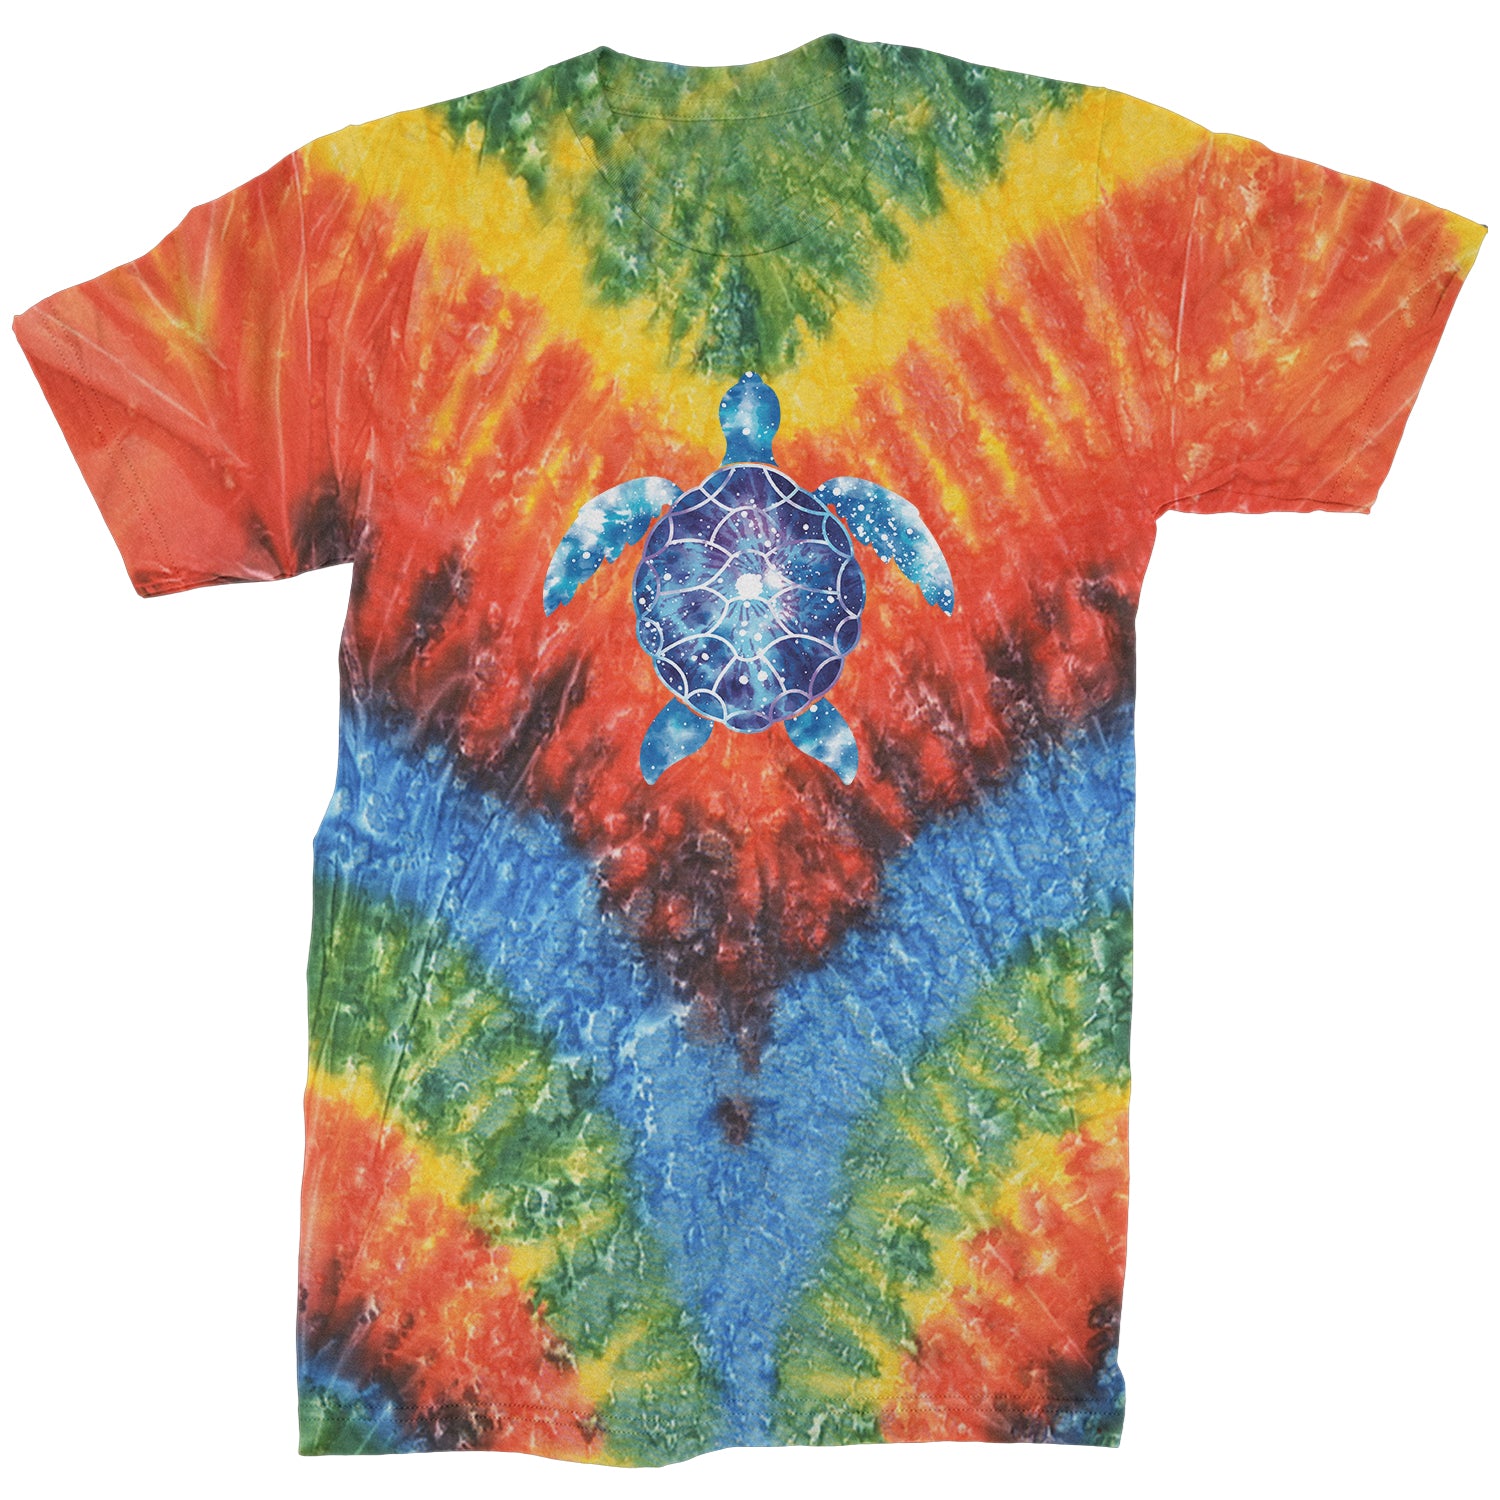 Tie Dye Sea Turtle Mens T-shirt eco, friendly, life, ocean, turtle by Expression Tees